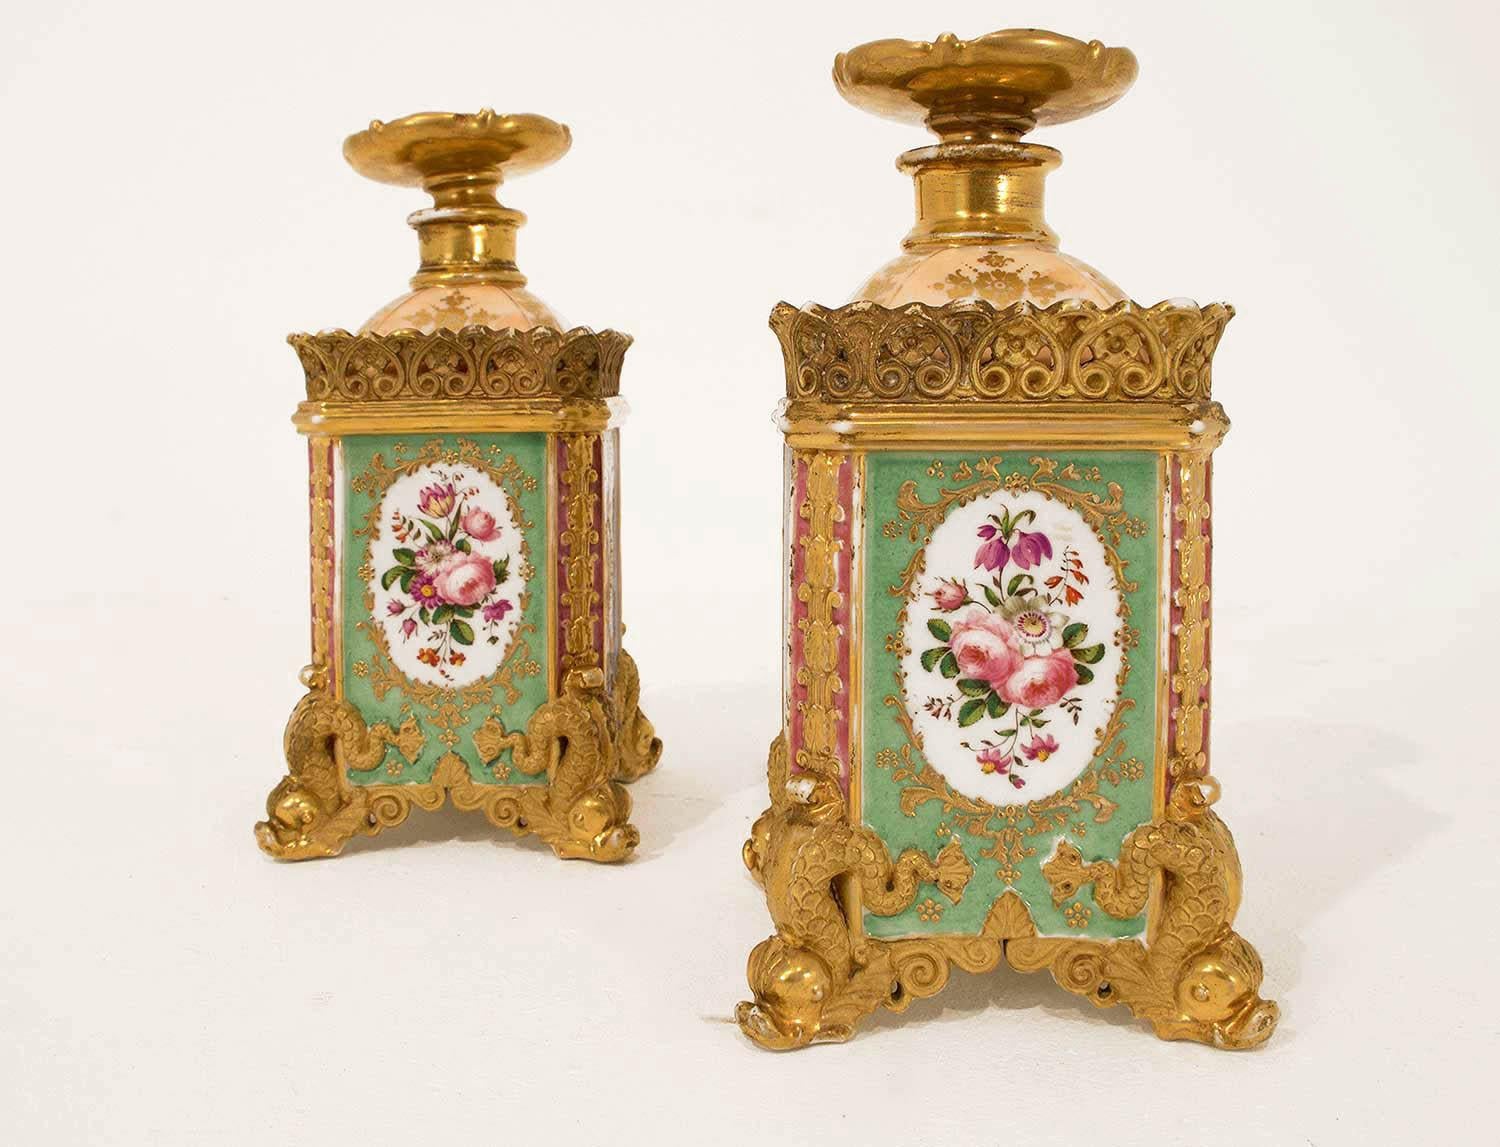 Pair of quadrangular flasks with canted corners in enameled porcelain. Two sides are decorated with birds of paradise in purple medallions on mauve background adorned with butterflies and flowers garlands. Two other sides, green background,